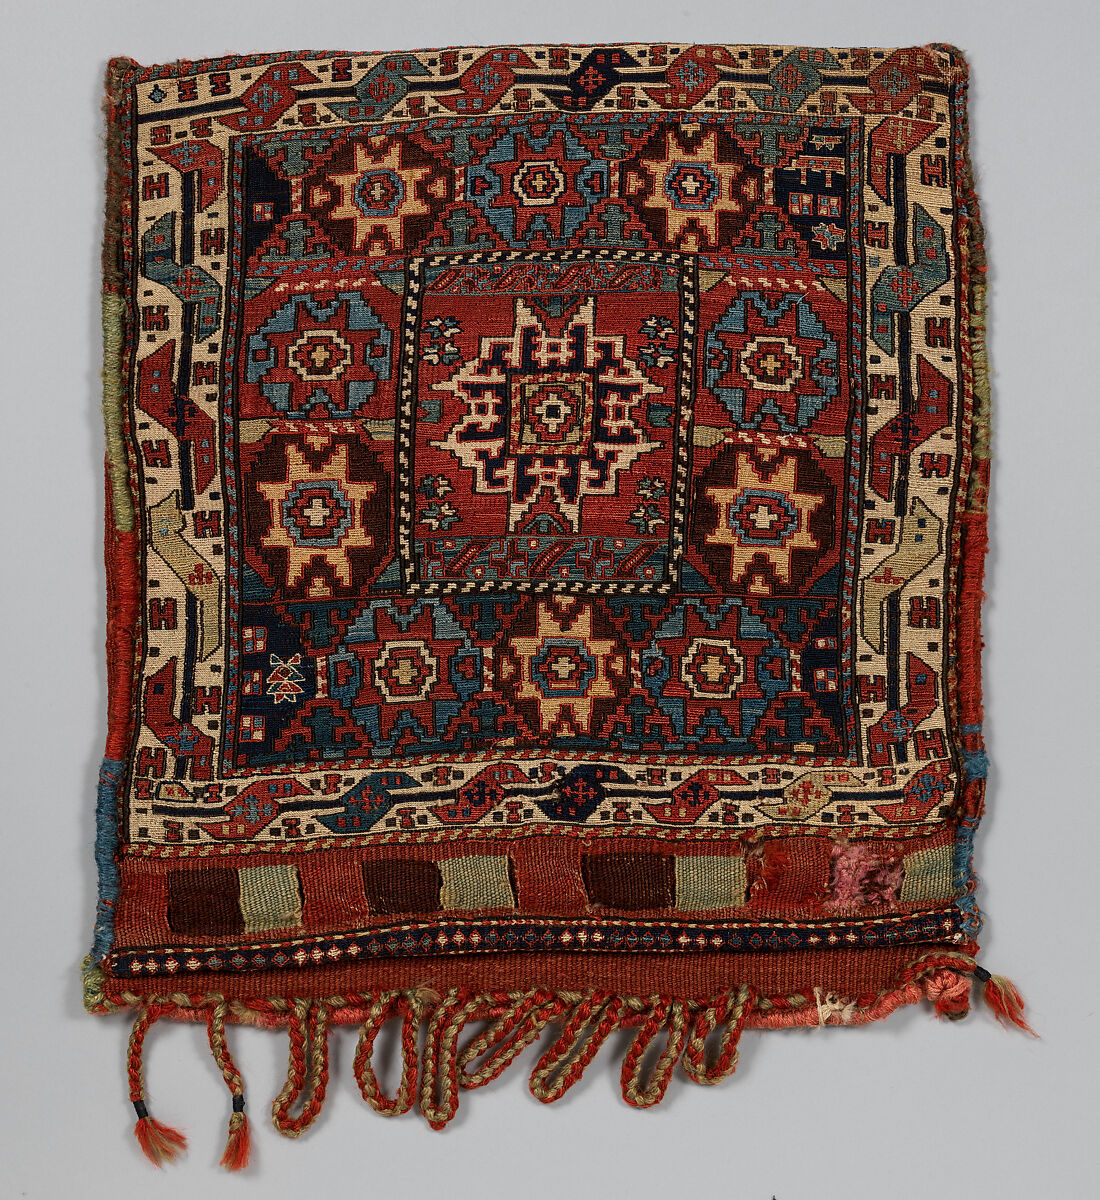 Face from Half of Double Saddle Bag (Khorjin), Wool; sumak brocaded, tapestry weave 